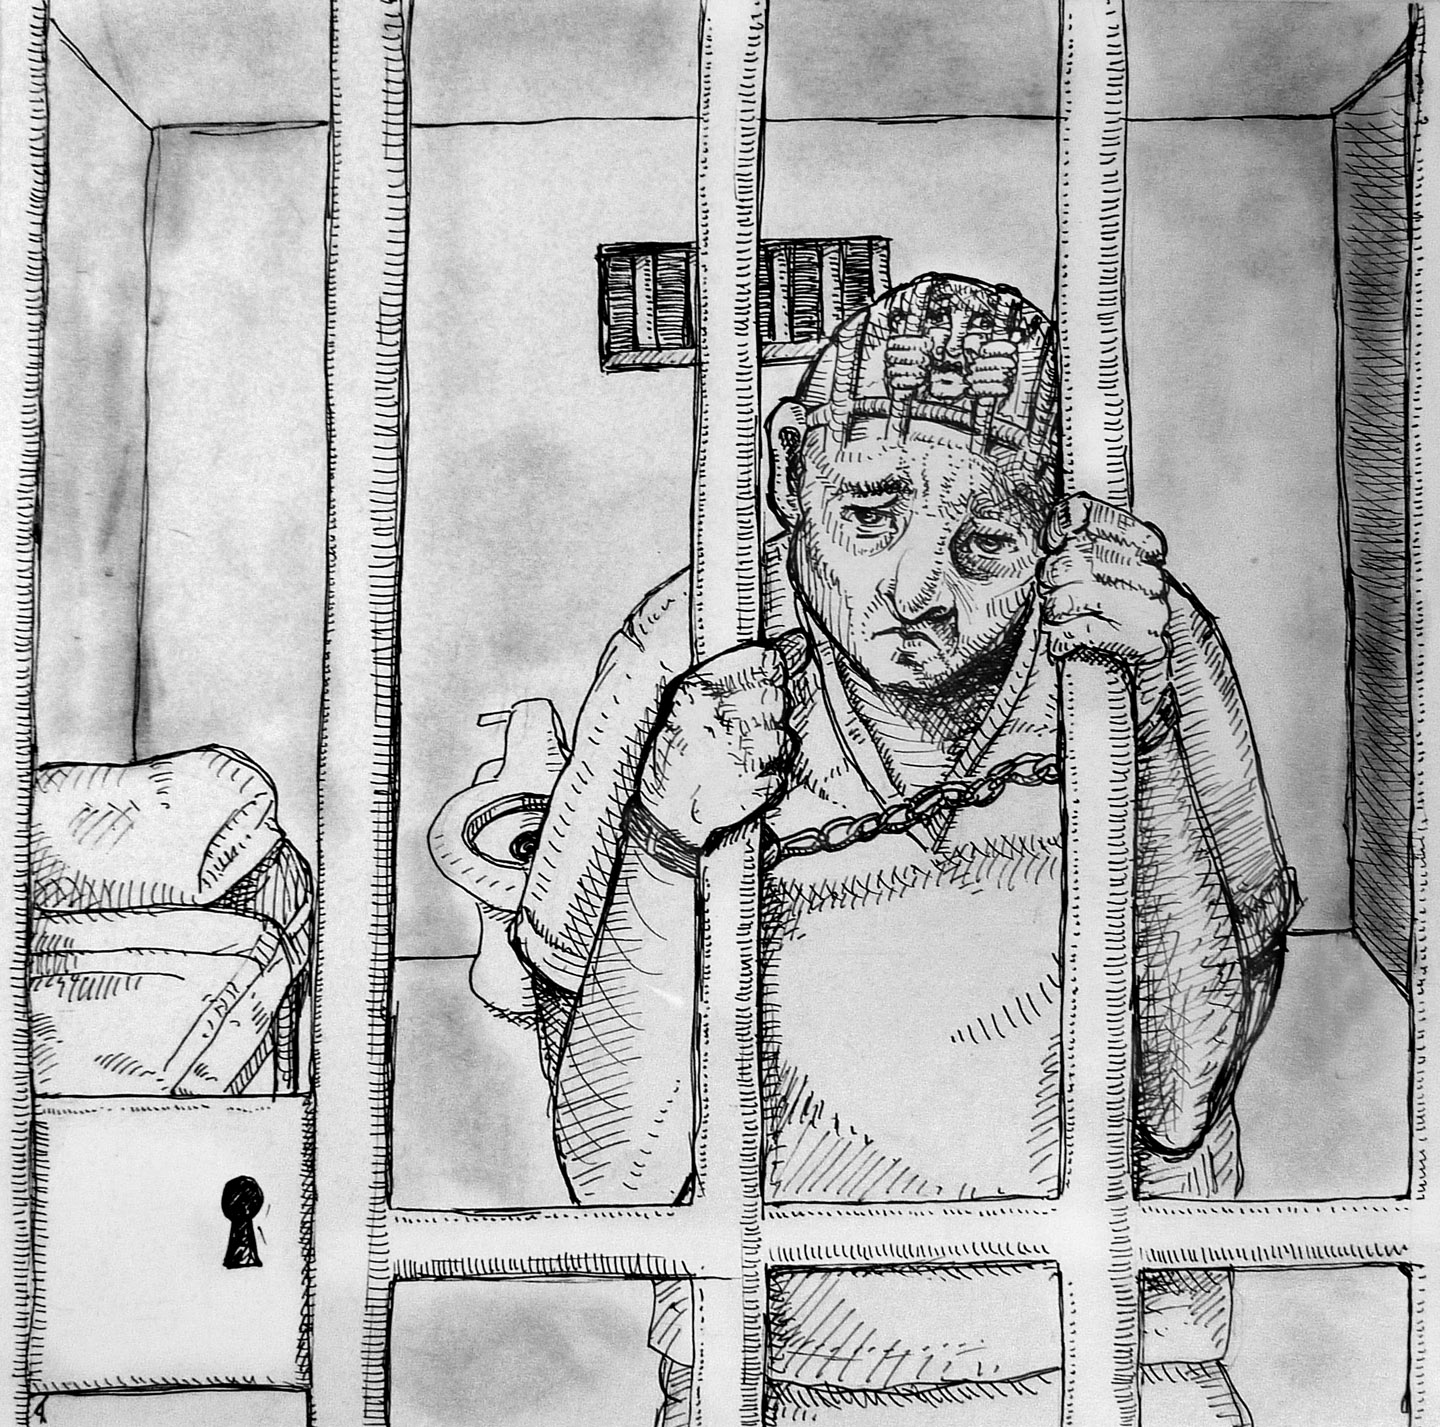 jail-cell-drawing-1.jpg